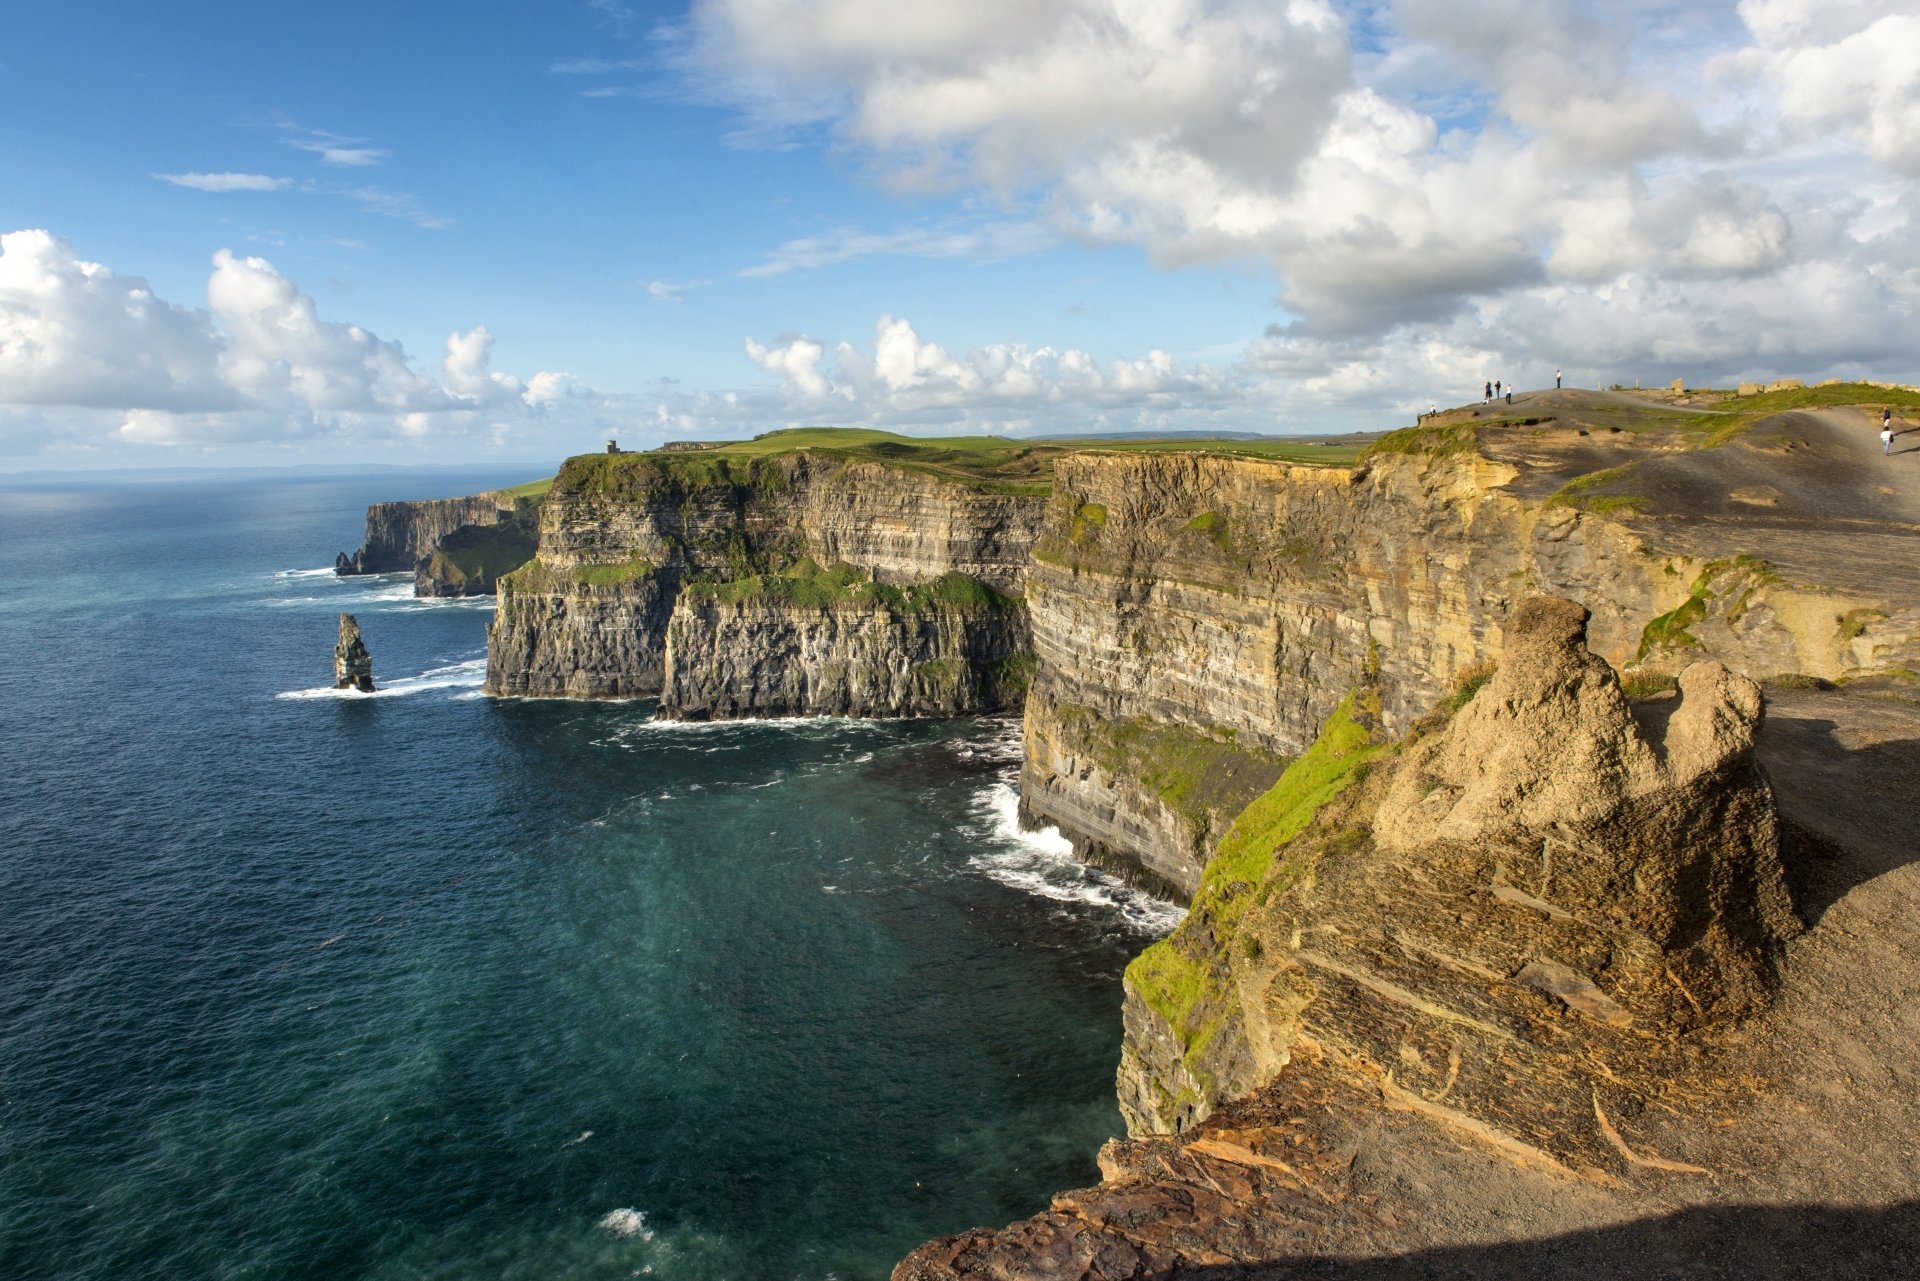 From Dublin to Awe-Inspiring Heights: Exploring Cliffs of Moher & Aran Islands on a Breathtaking Tour